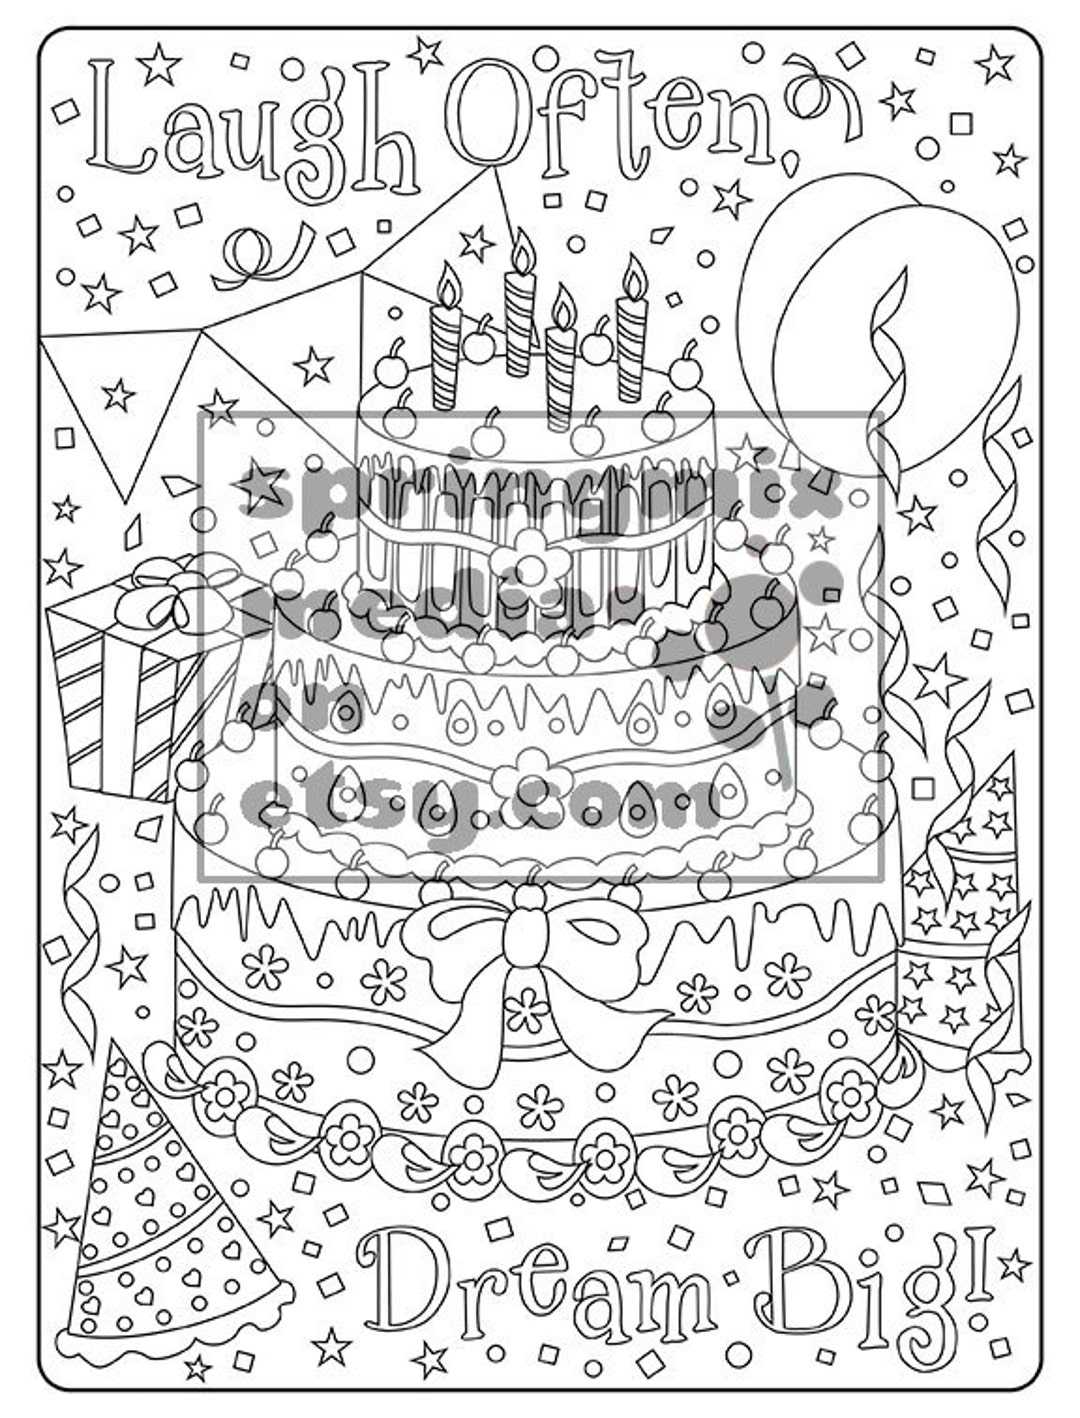 Coloring Page to Relax Soothing Calm and Delightful Pages to - Etsy